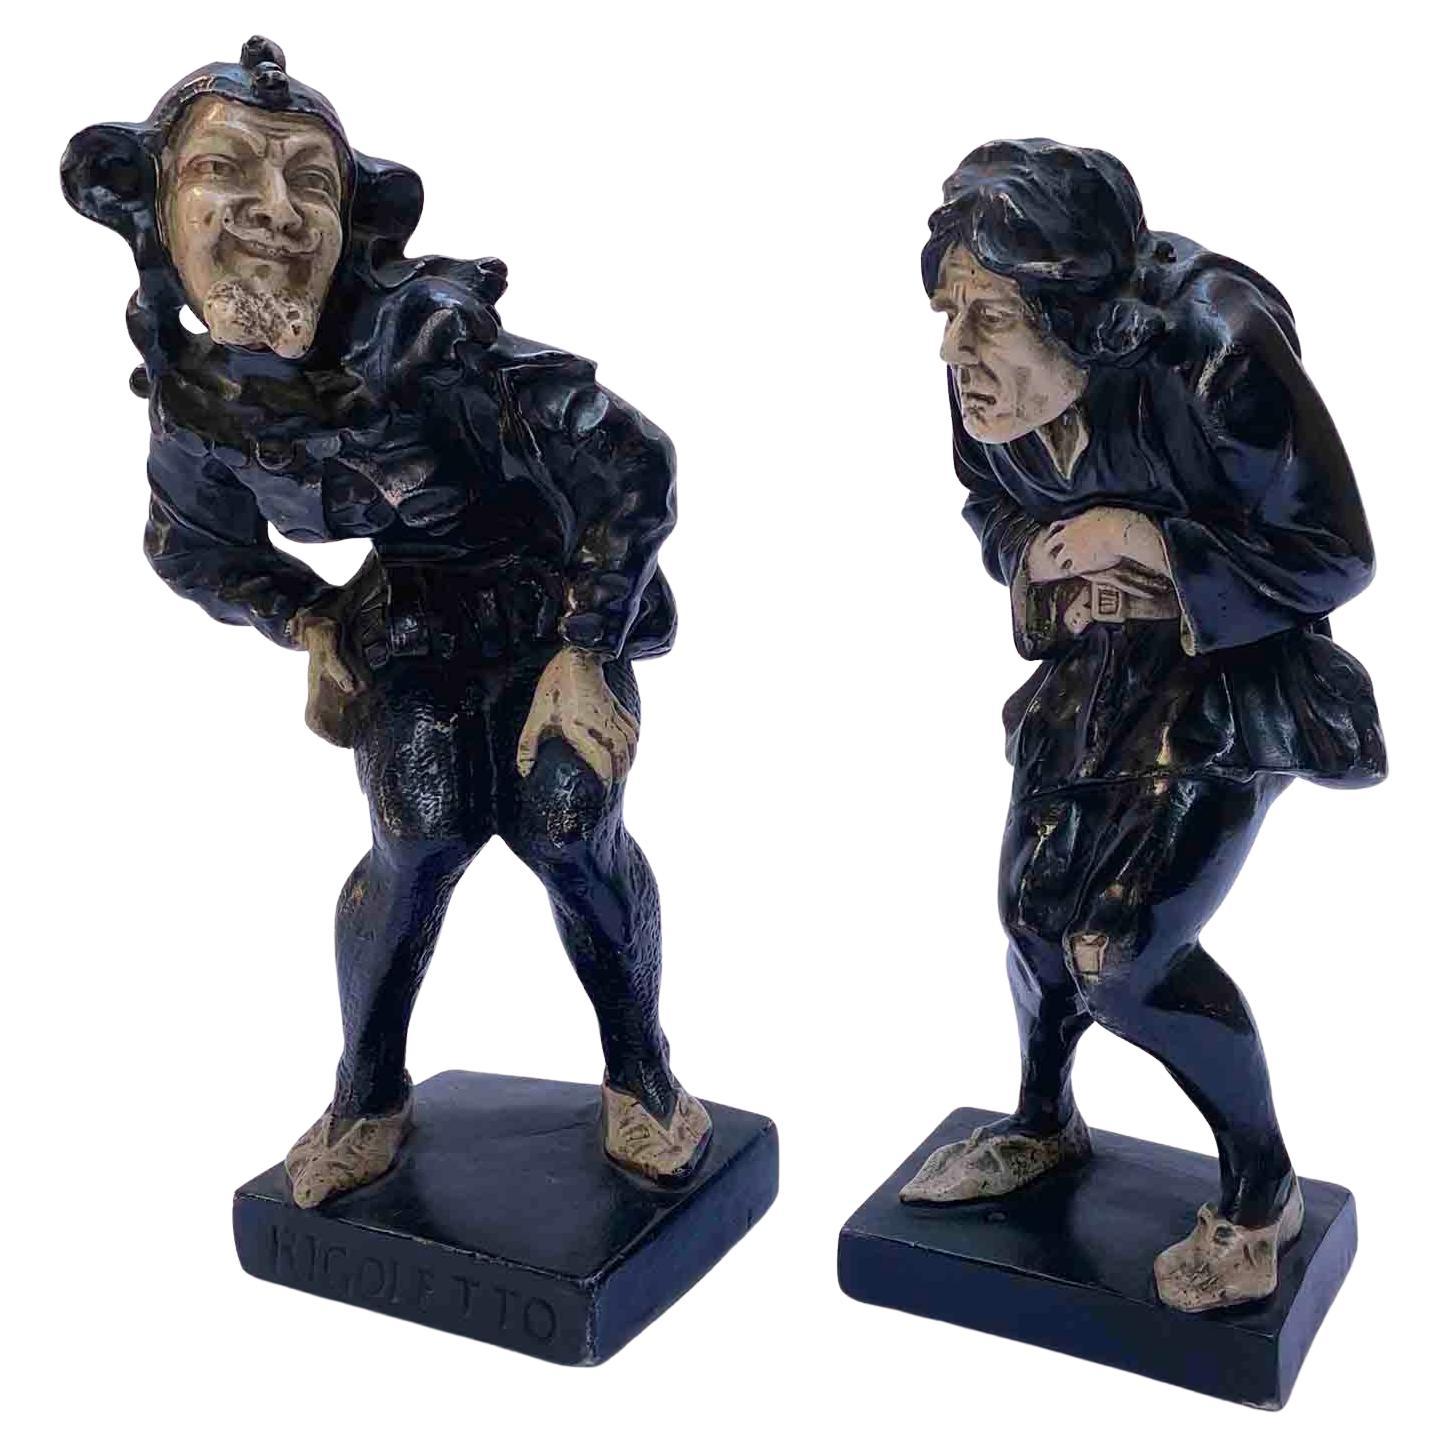 Pair of Grotesque Caricature figurines of the first half of 20th century. One figurine depicting Rigoletto, the deformed jester from the famous Verdi opera with the famous aria La donna è mobile. The standing sculpture is made of patinated plaster